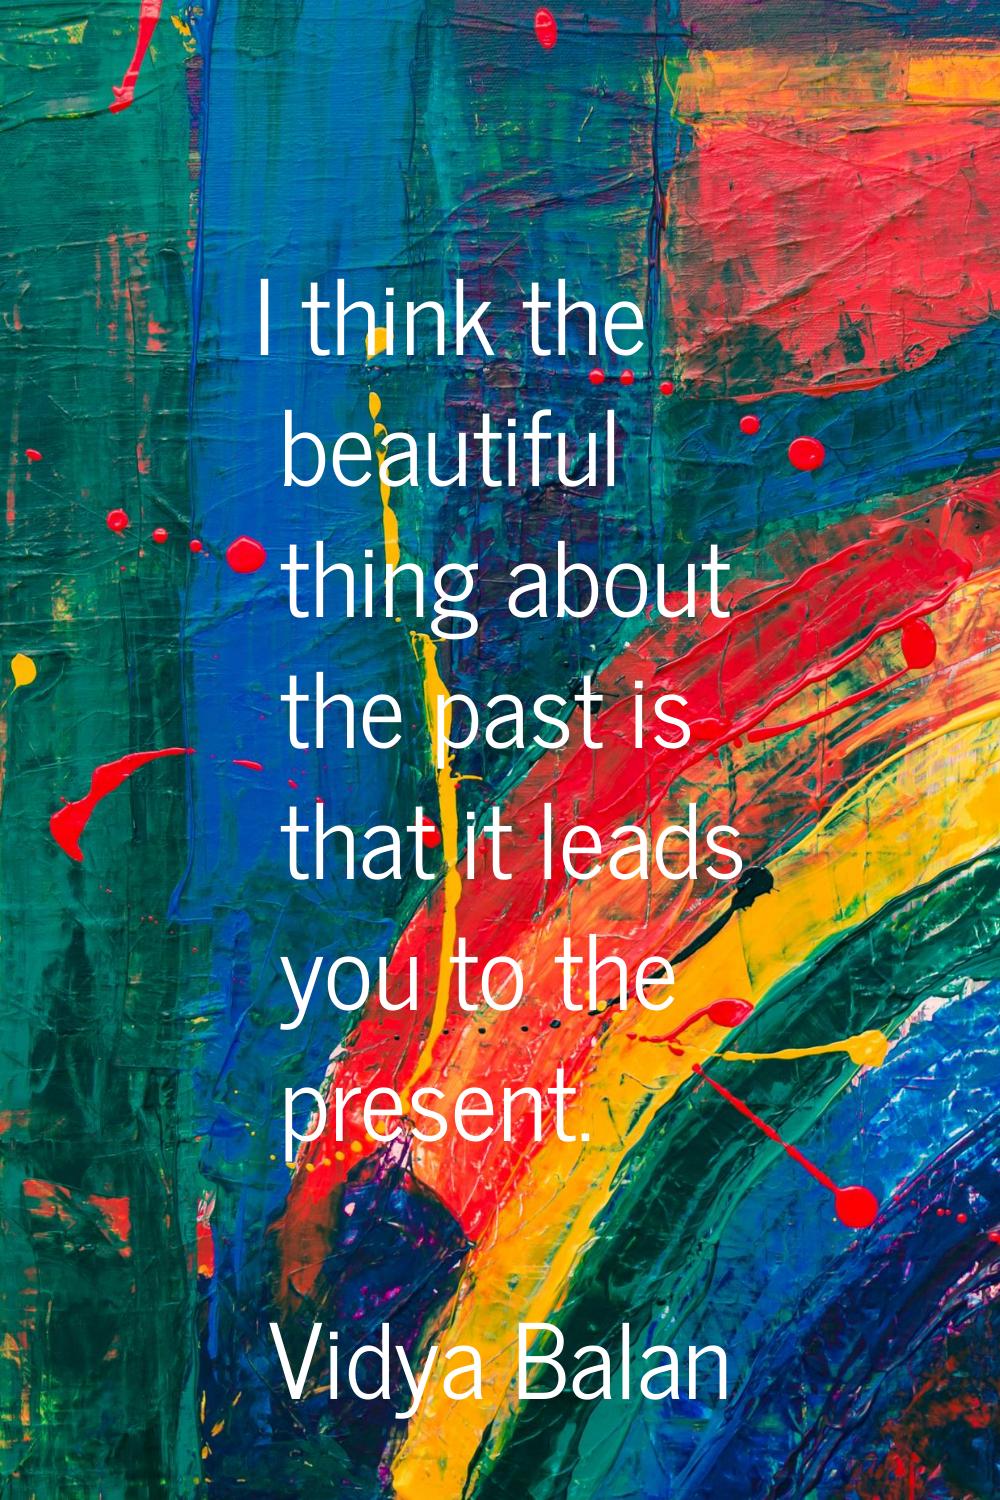 I think the beautiful thing about the past is that it leads you to the present.